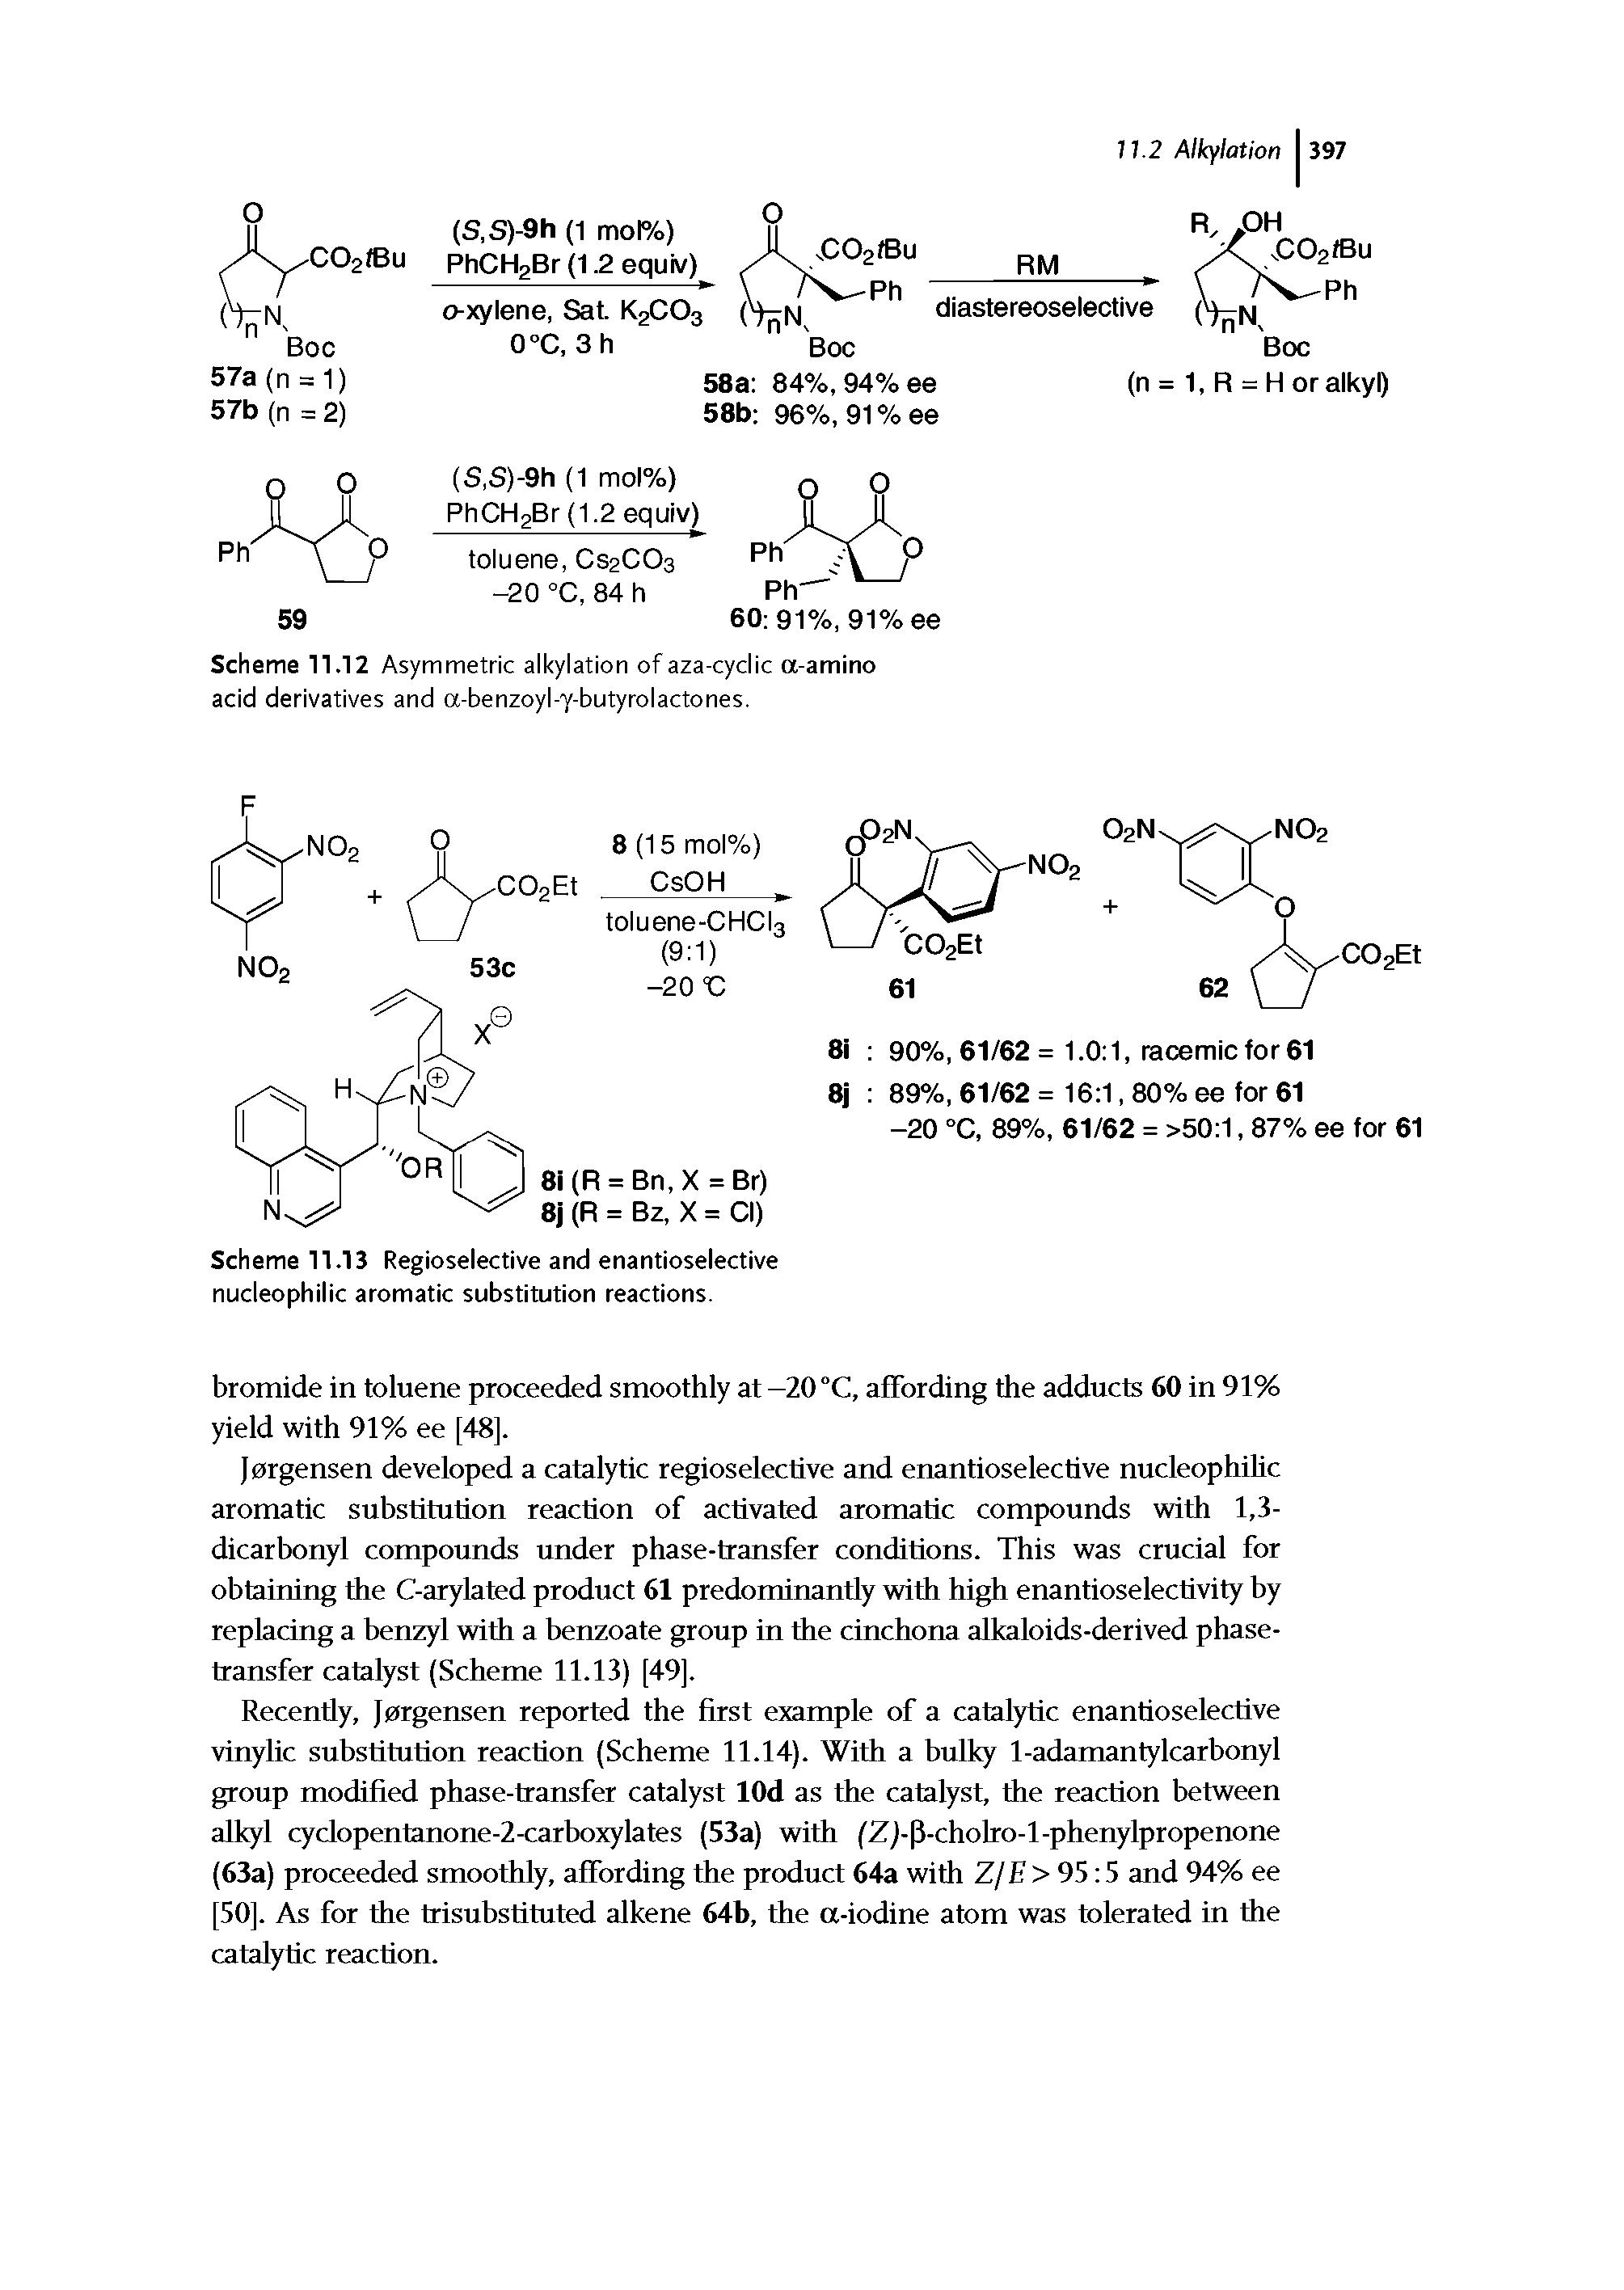 Scheme 11.13 Regioselective and enantioselective nucleophilic aromatic substitution reactions.